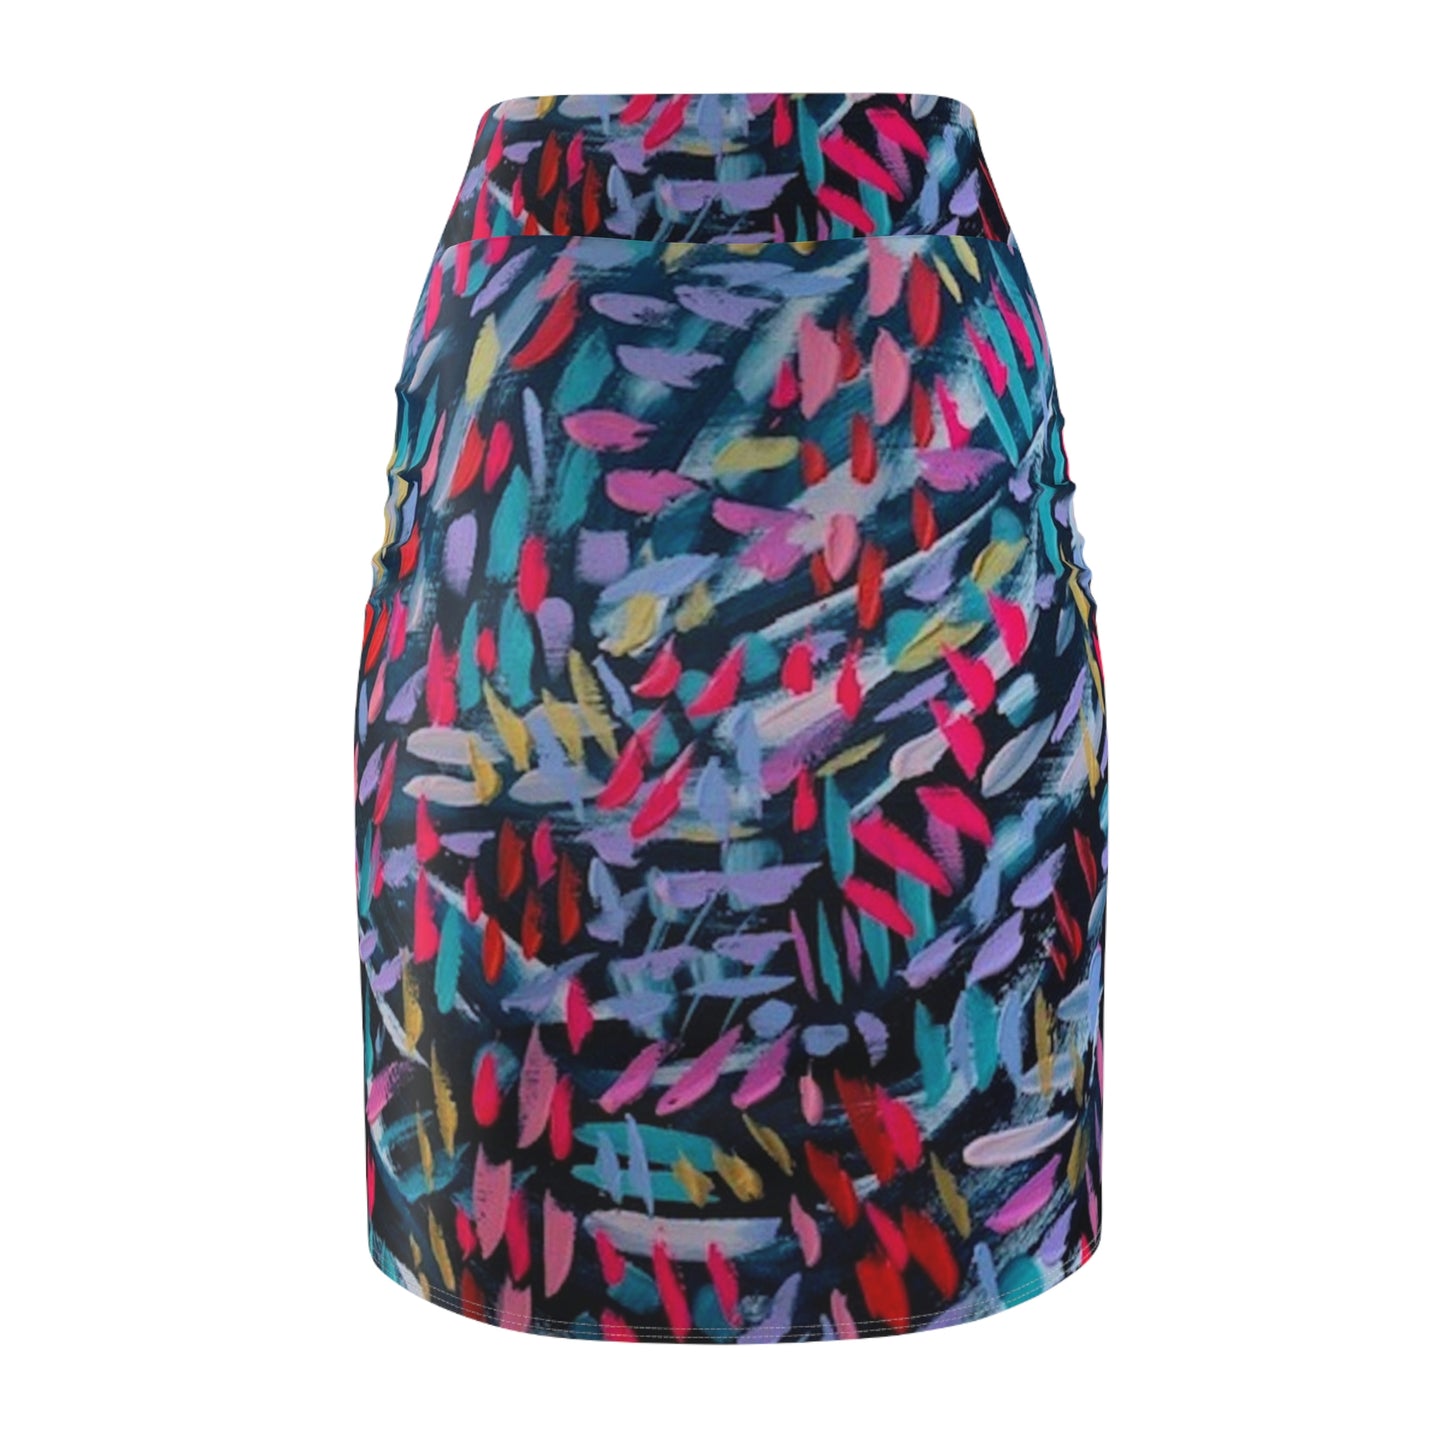 "Out of the Darkness Must come Light" Women's Pencil Skirt